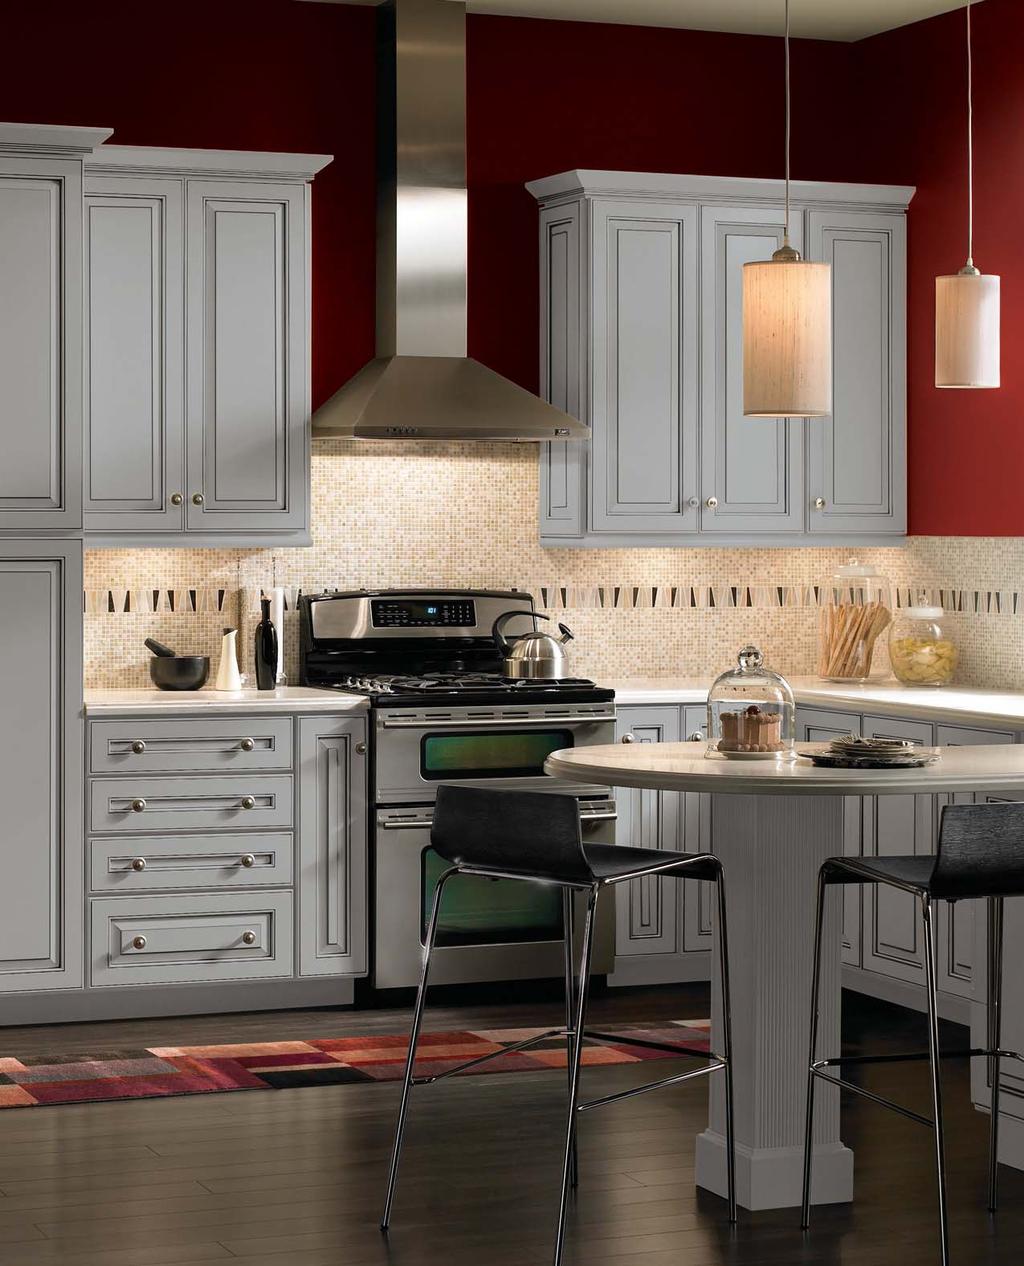 6 Echelon Cabinetry Maple Cabinetry A